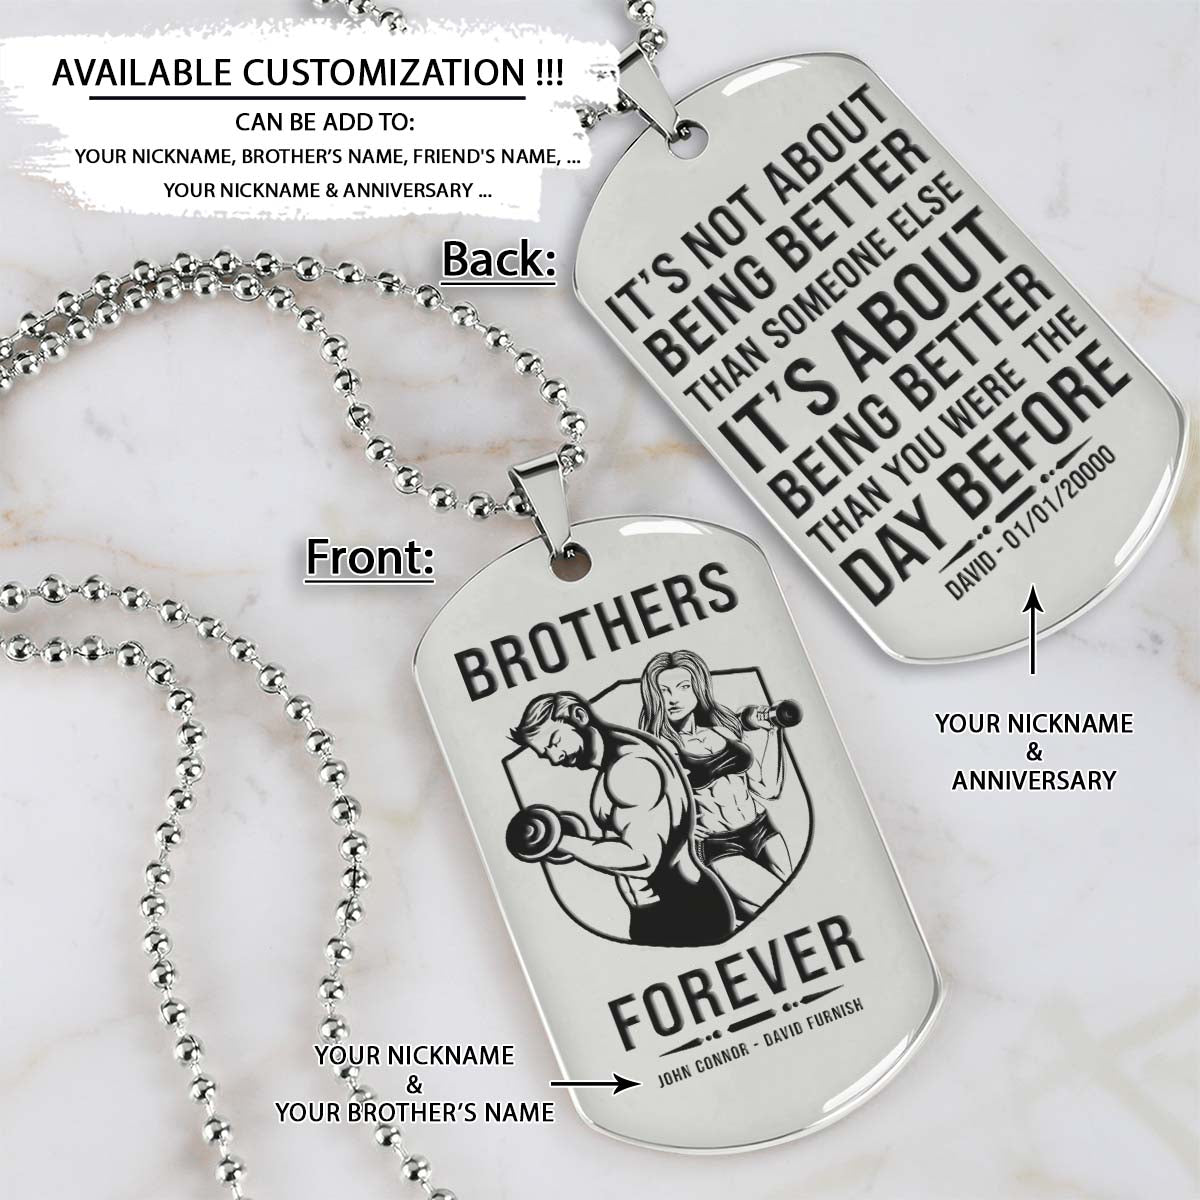 GYMD009 - Brothers Forever - It's About Being Better Than You Were The Day Before - Gym - Fitness Center - Workout - Gym Dog Tag - Gym Necklace - Silver Engrave Dog Tag